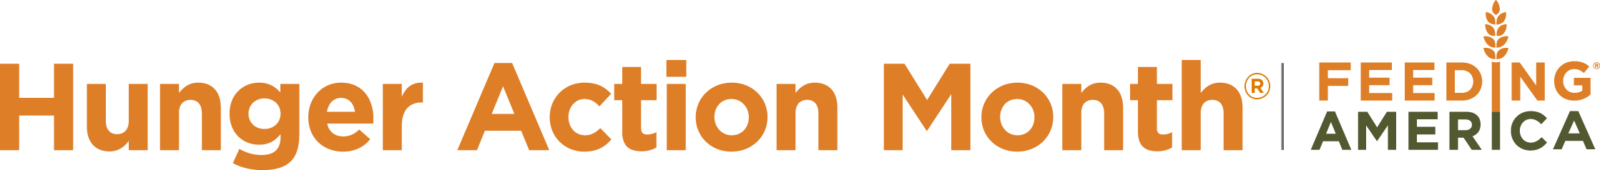 Hunger Action Month Logo as a Banner